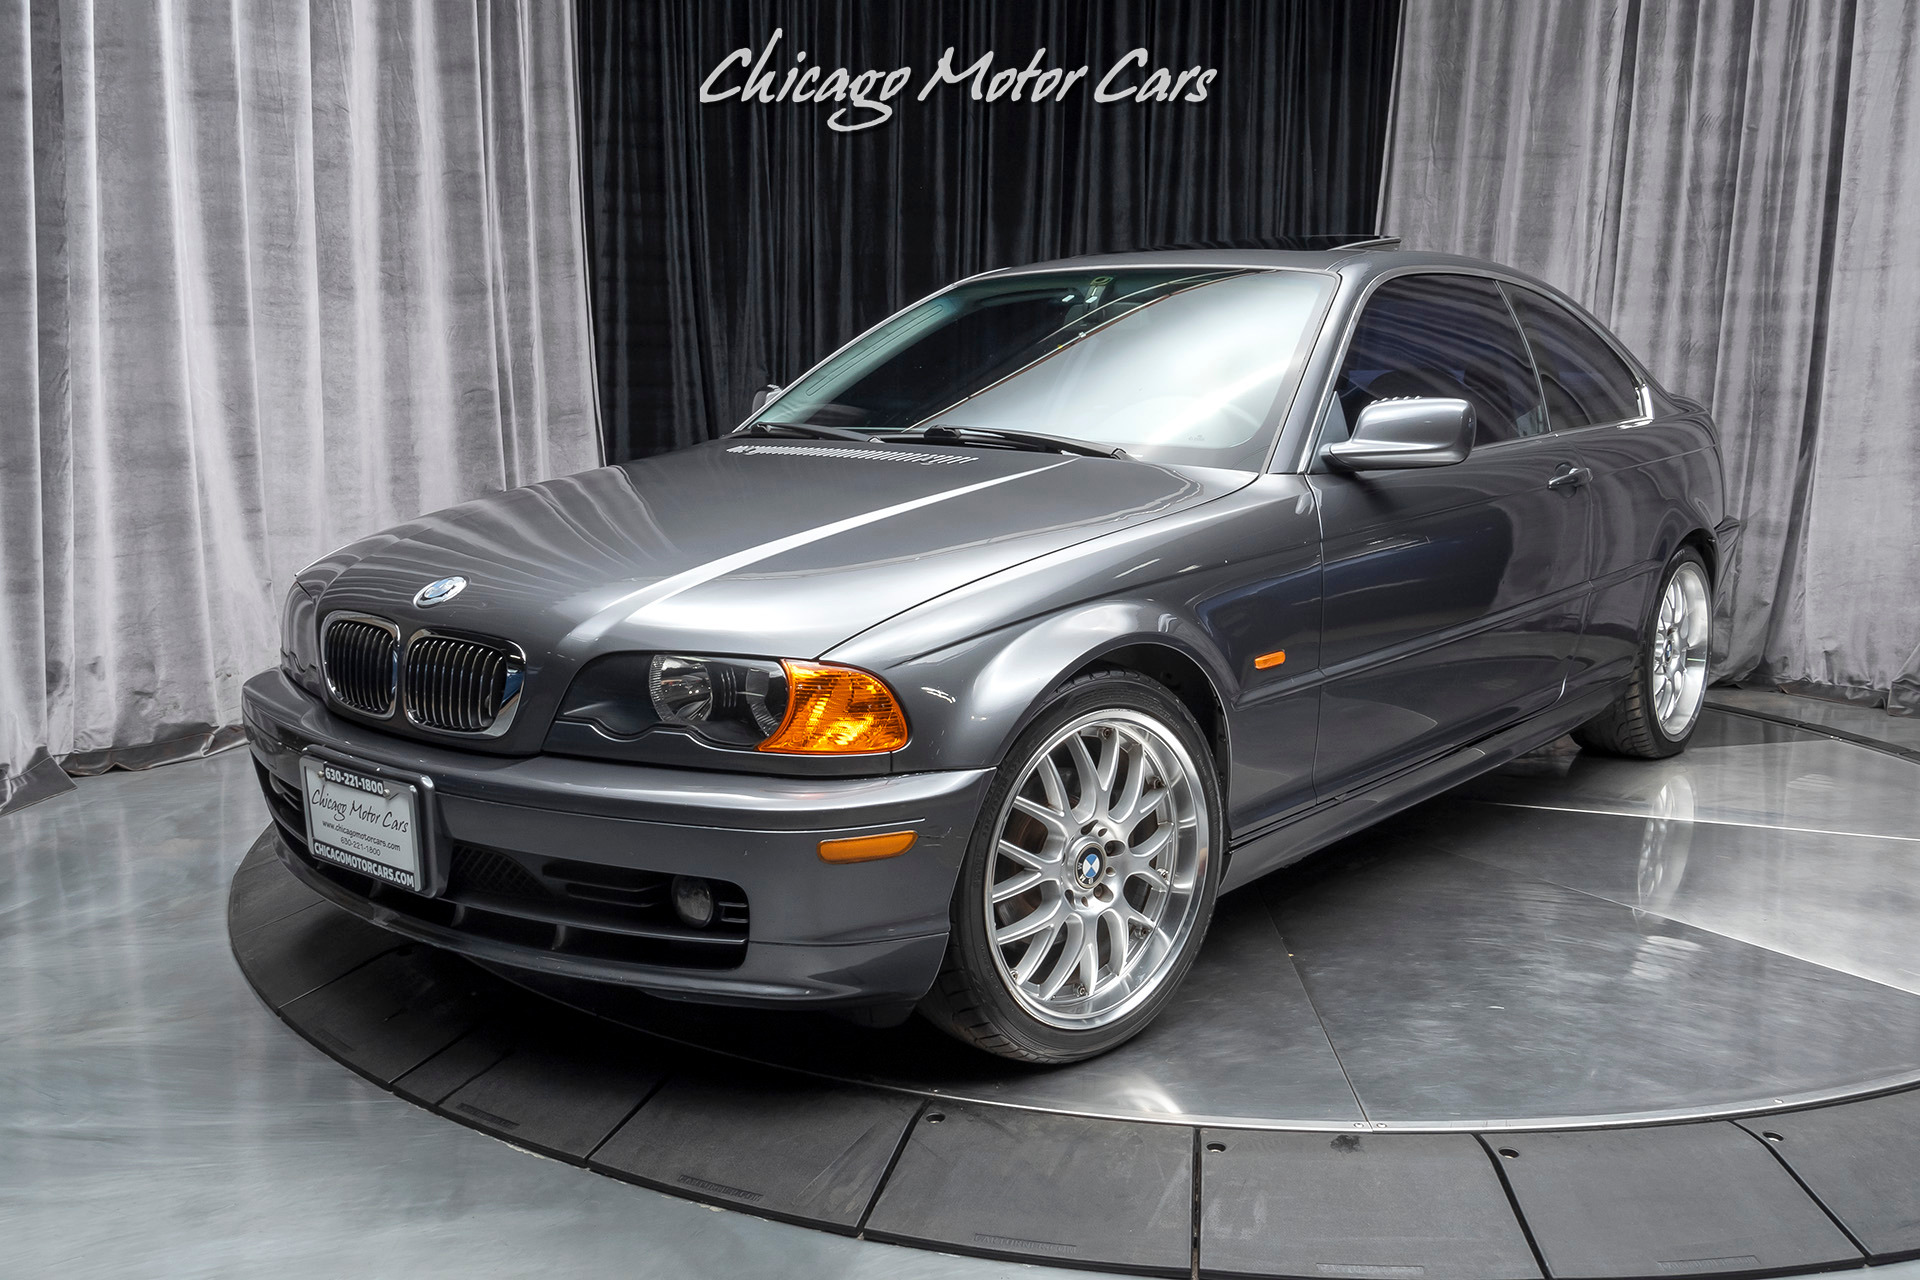 Used 2000 BMW 323Ci Coupe MSRP $35K+ VERY WELL EQUIPPED! For Sale ($3,750)  | Chicago Motor Cars Stock #16963